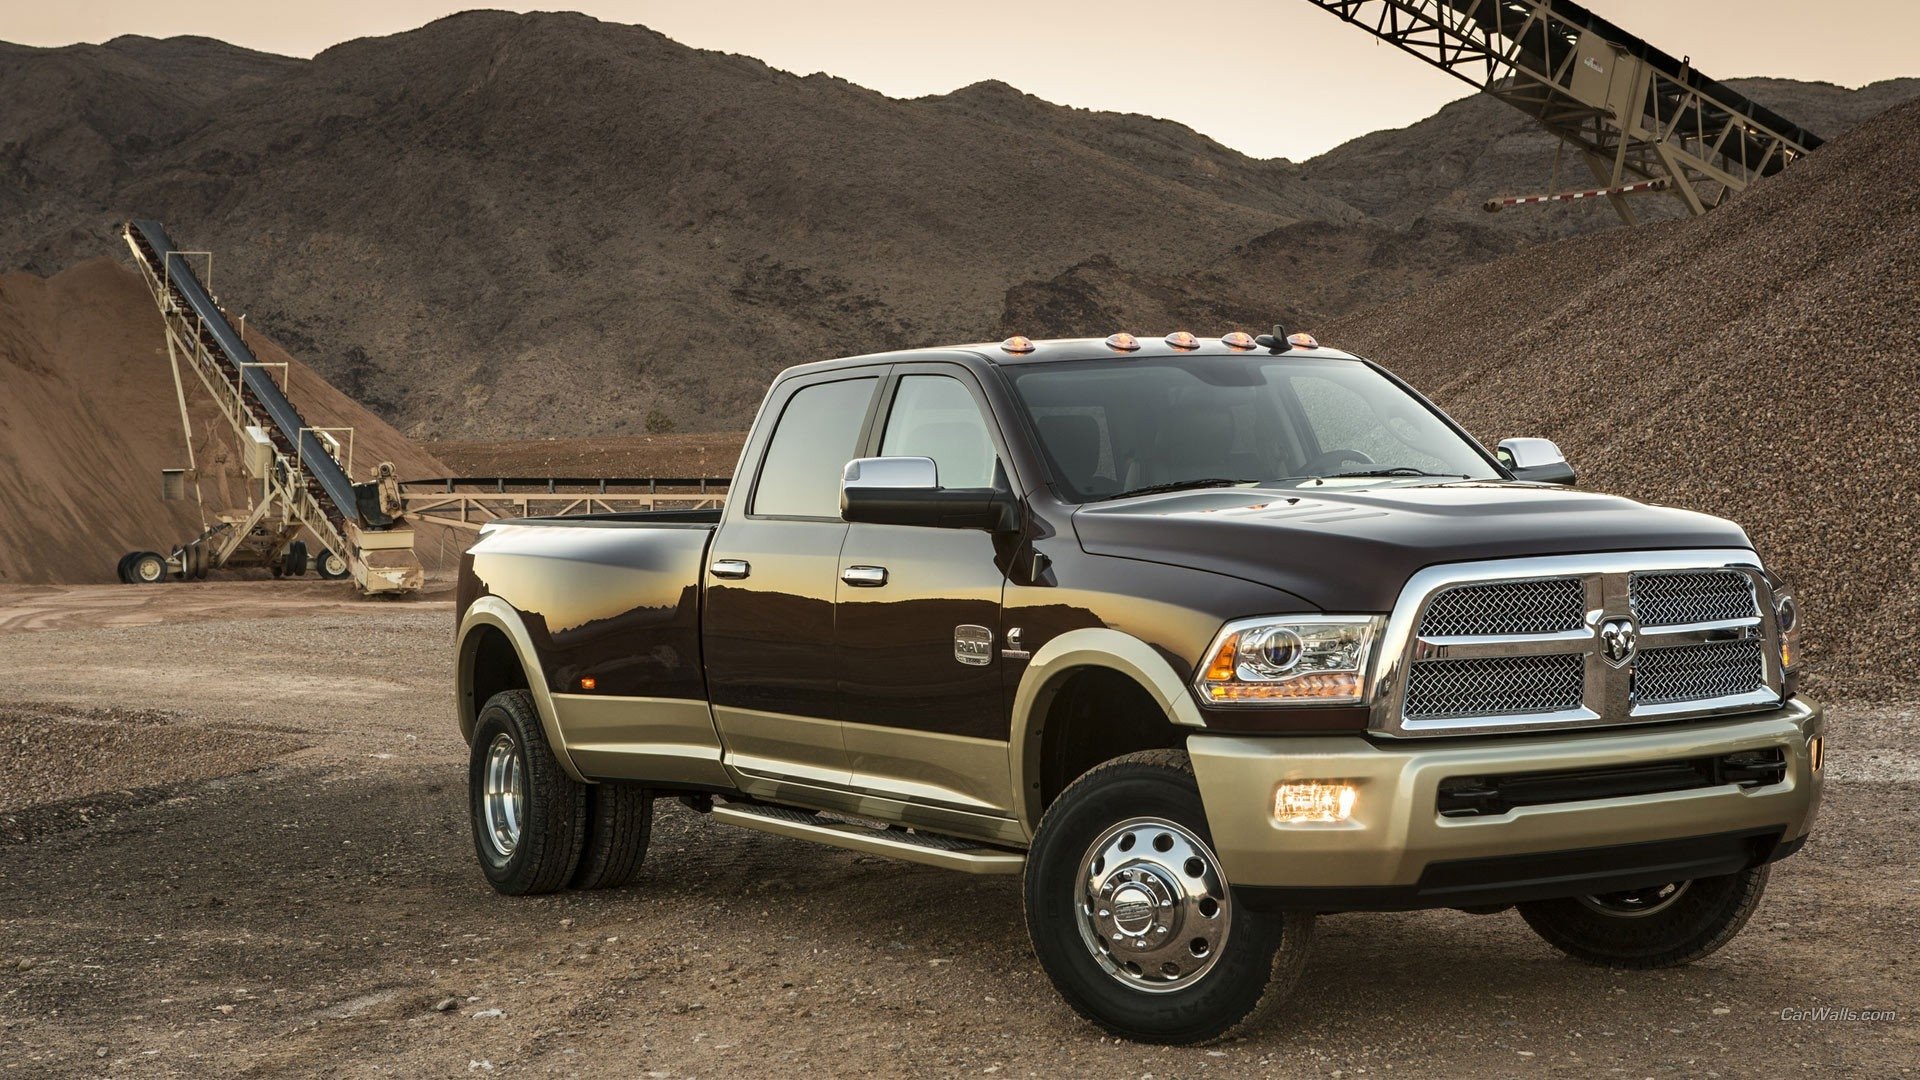 Dodge Ram 3500 HD Wallpaper and Background Image